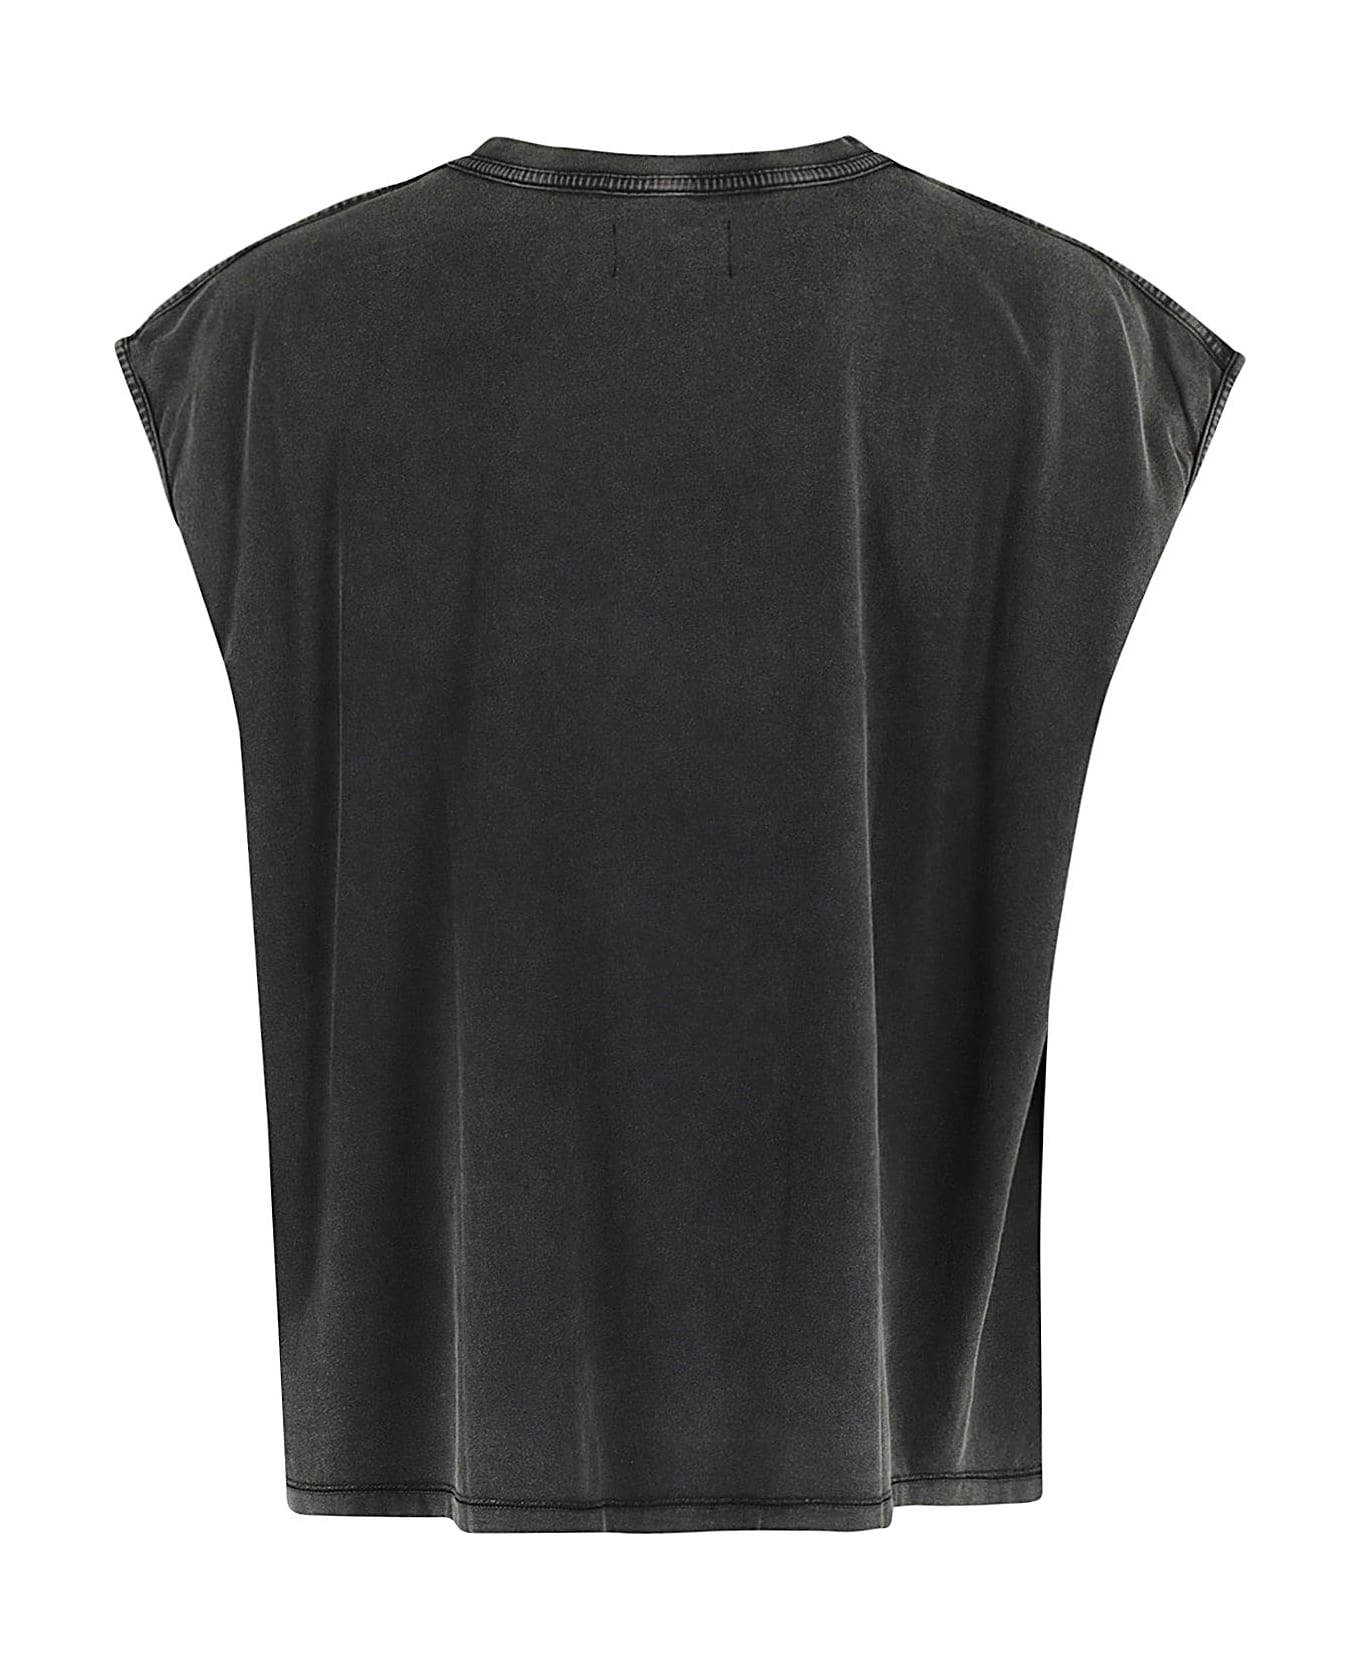 Liberal Youth Ministry Sleeveless - Black 